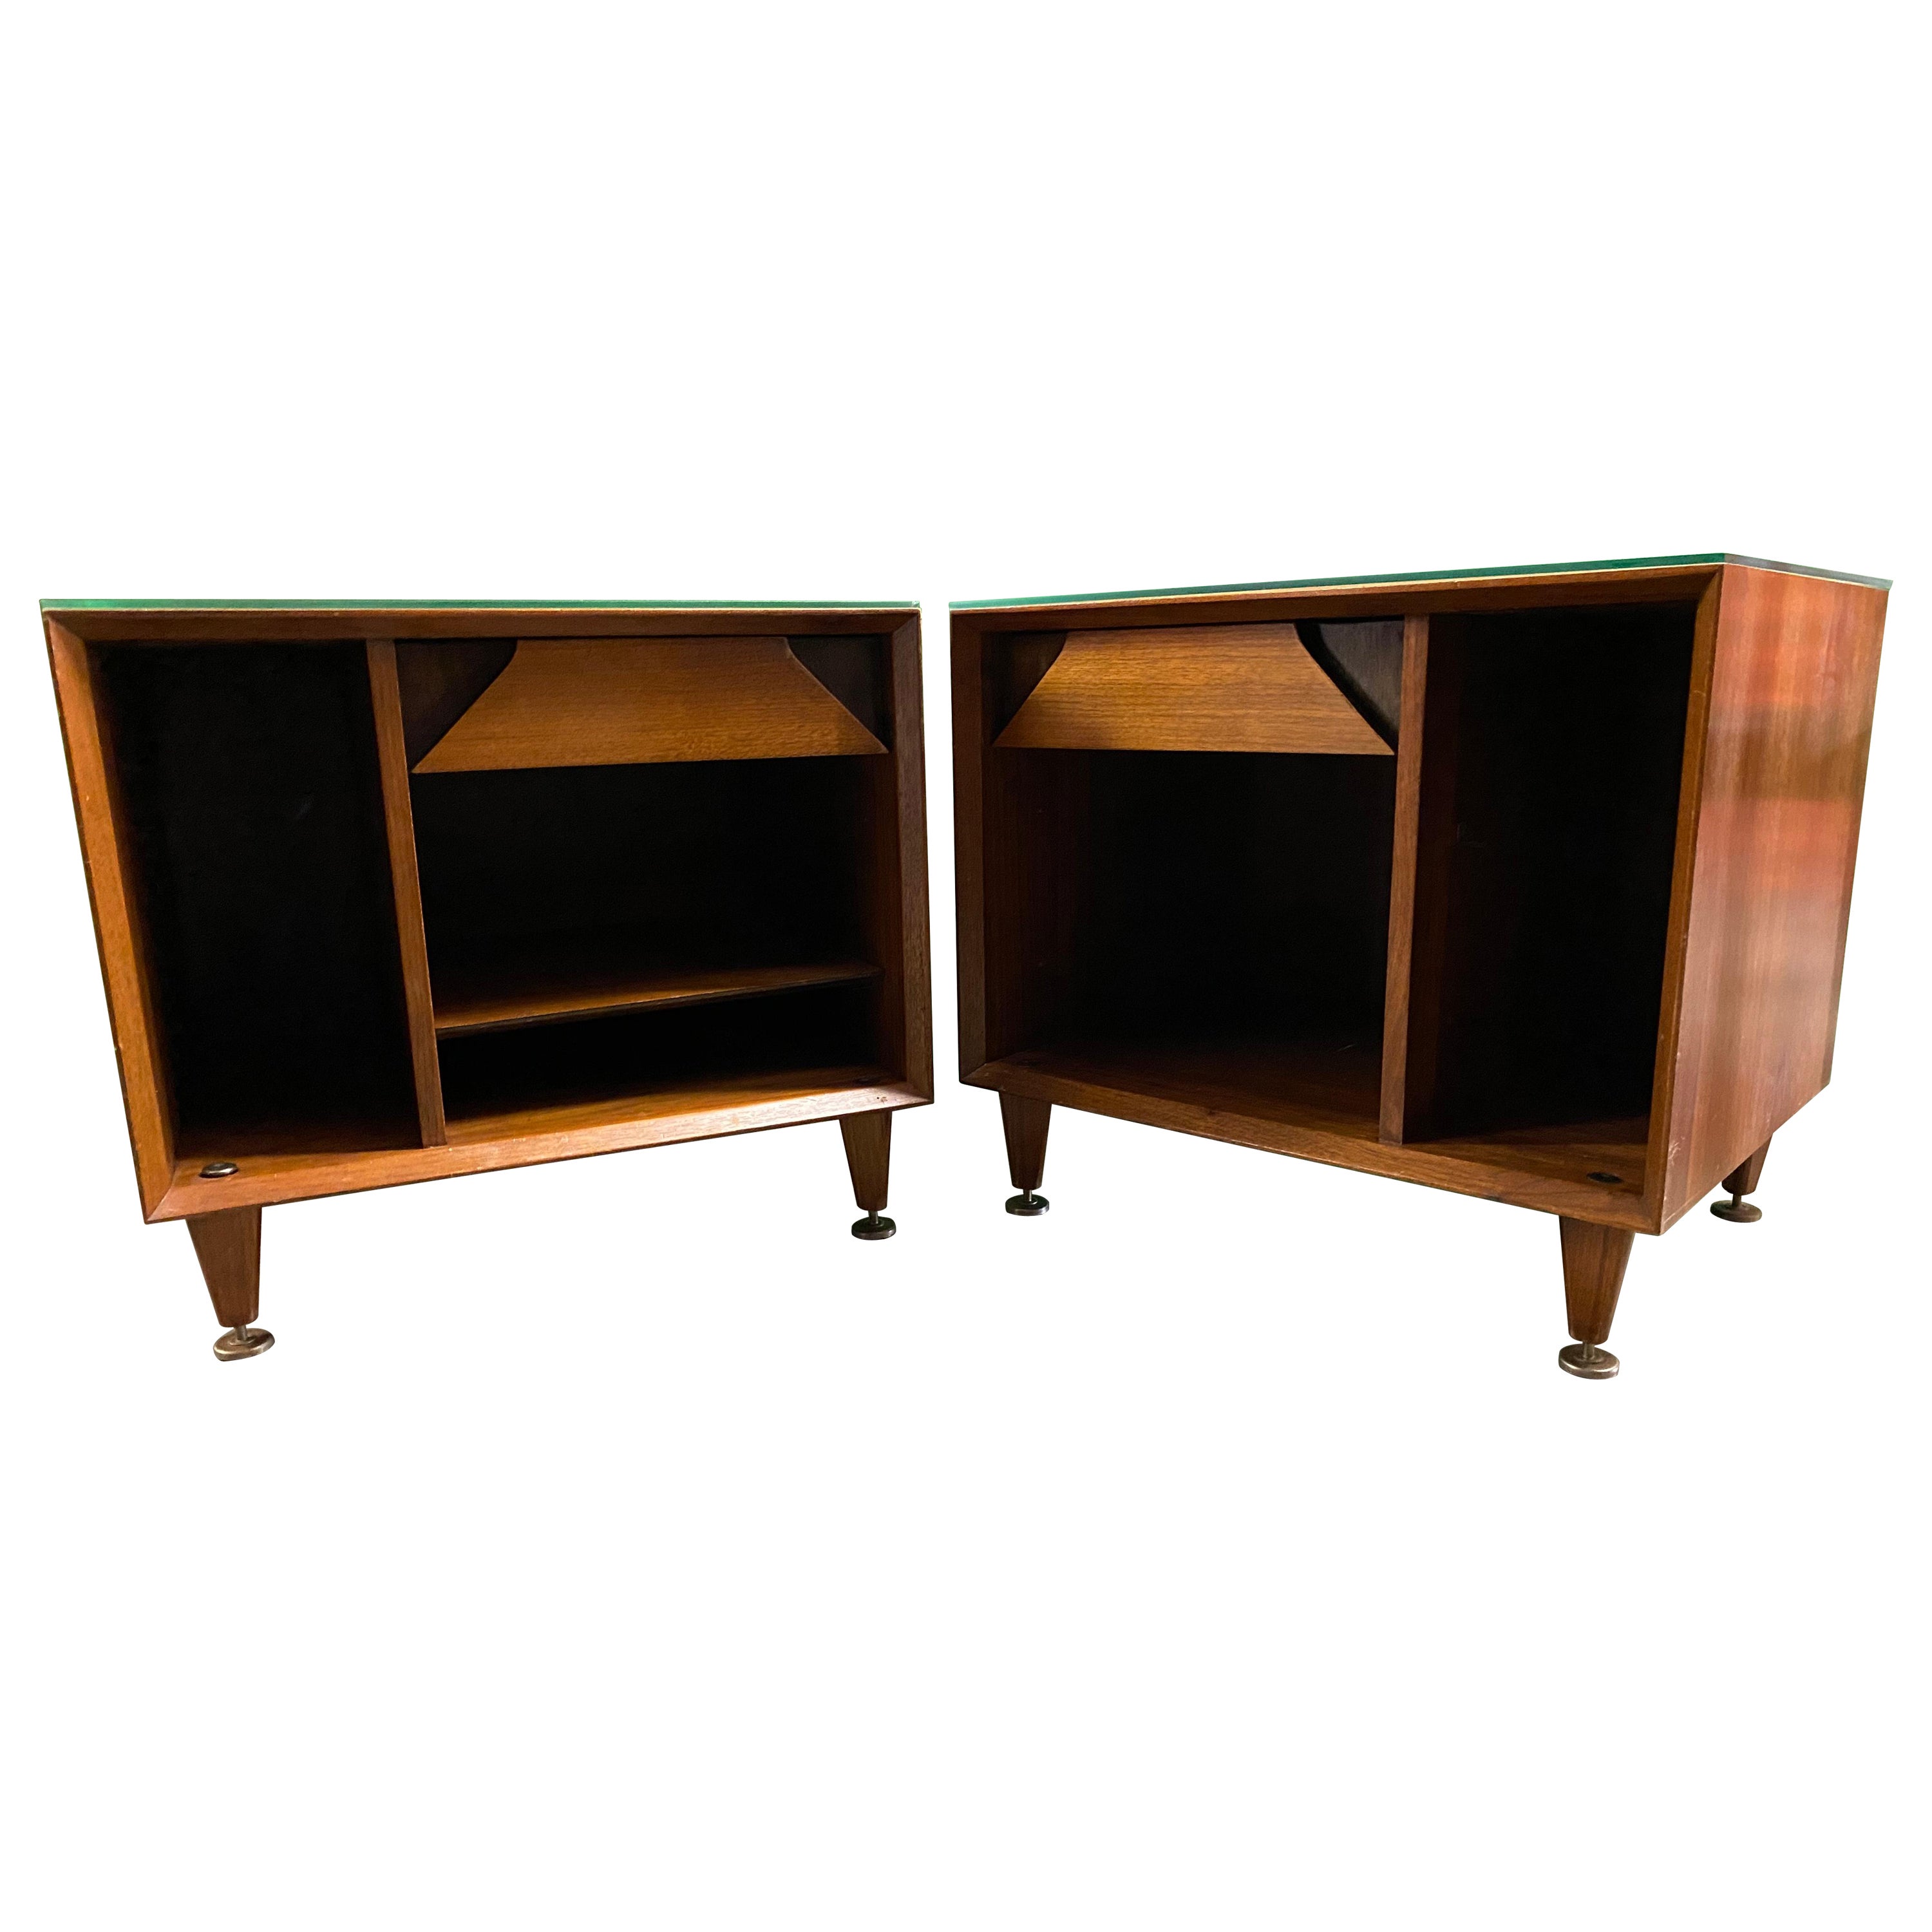 Pair of Mid-Century Modern Walnut Nightstands by Marc Berge for Grosfeld House For Sale